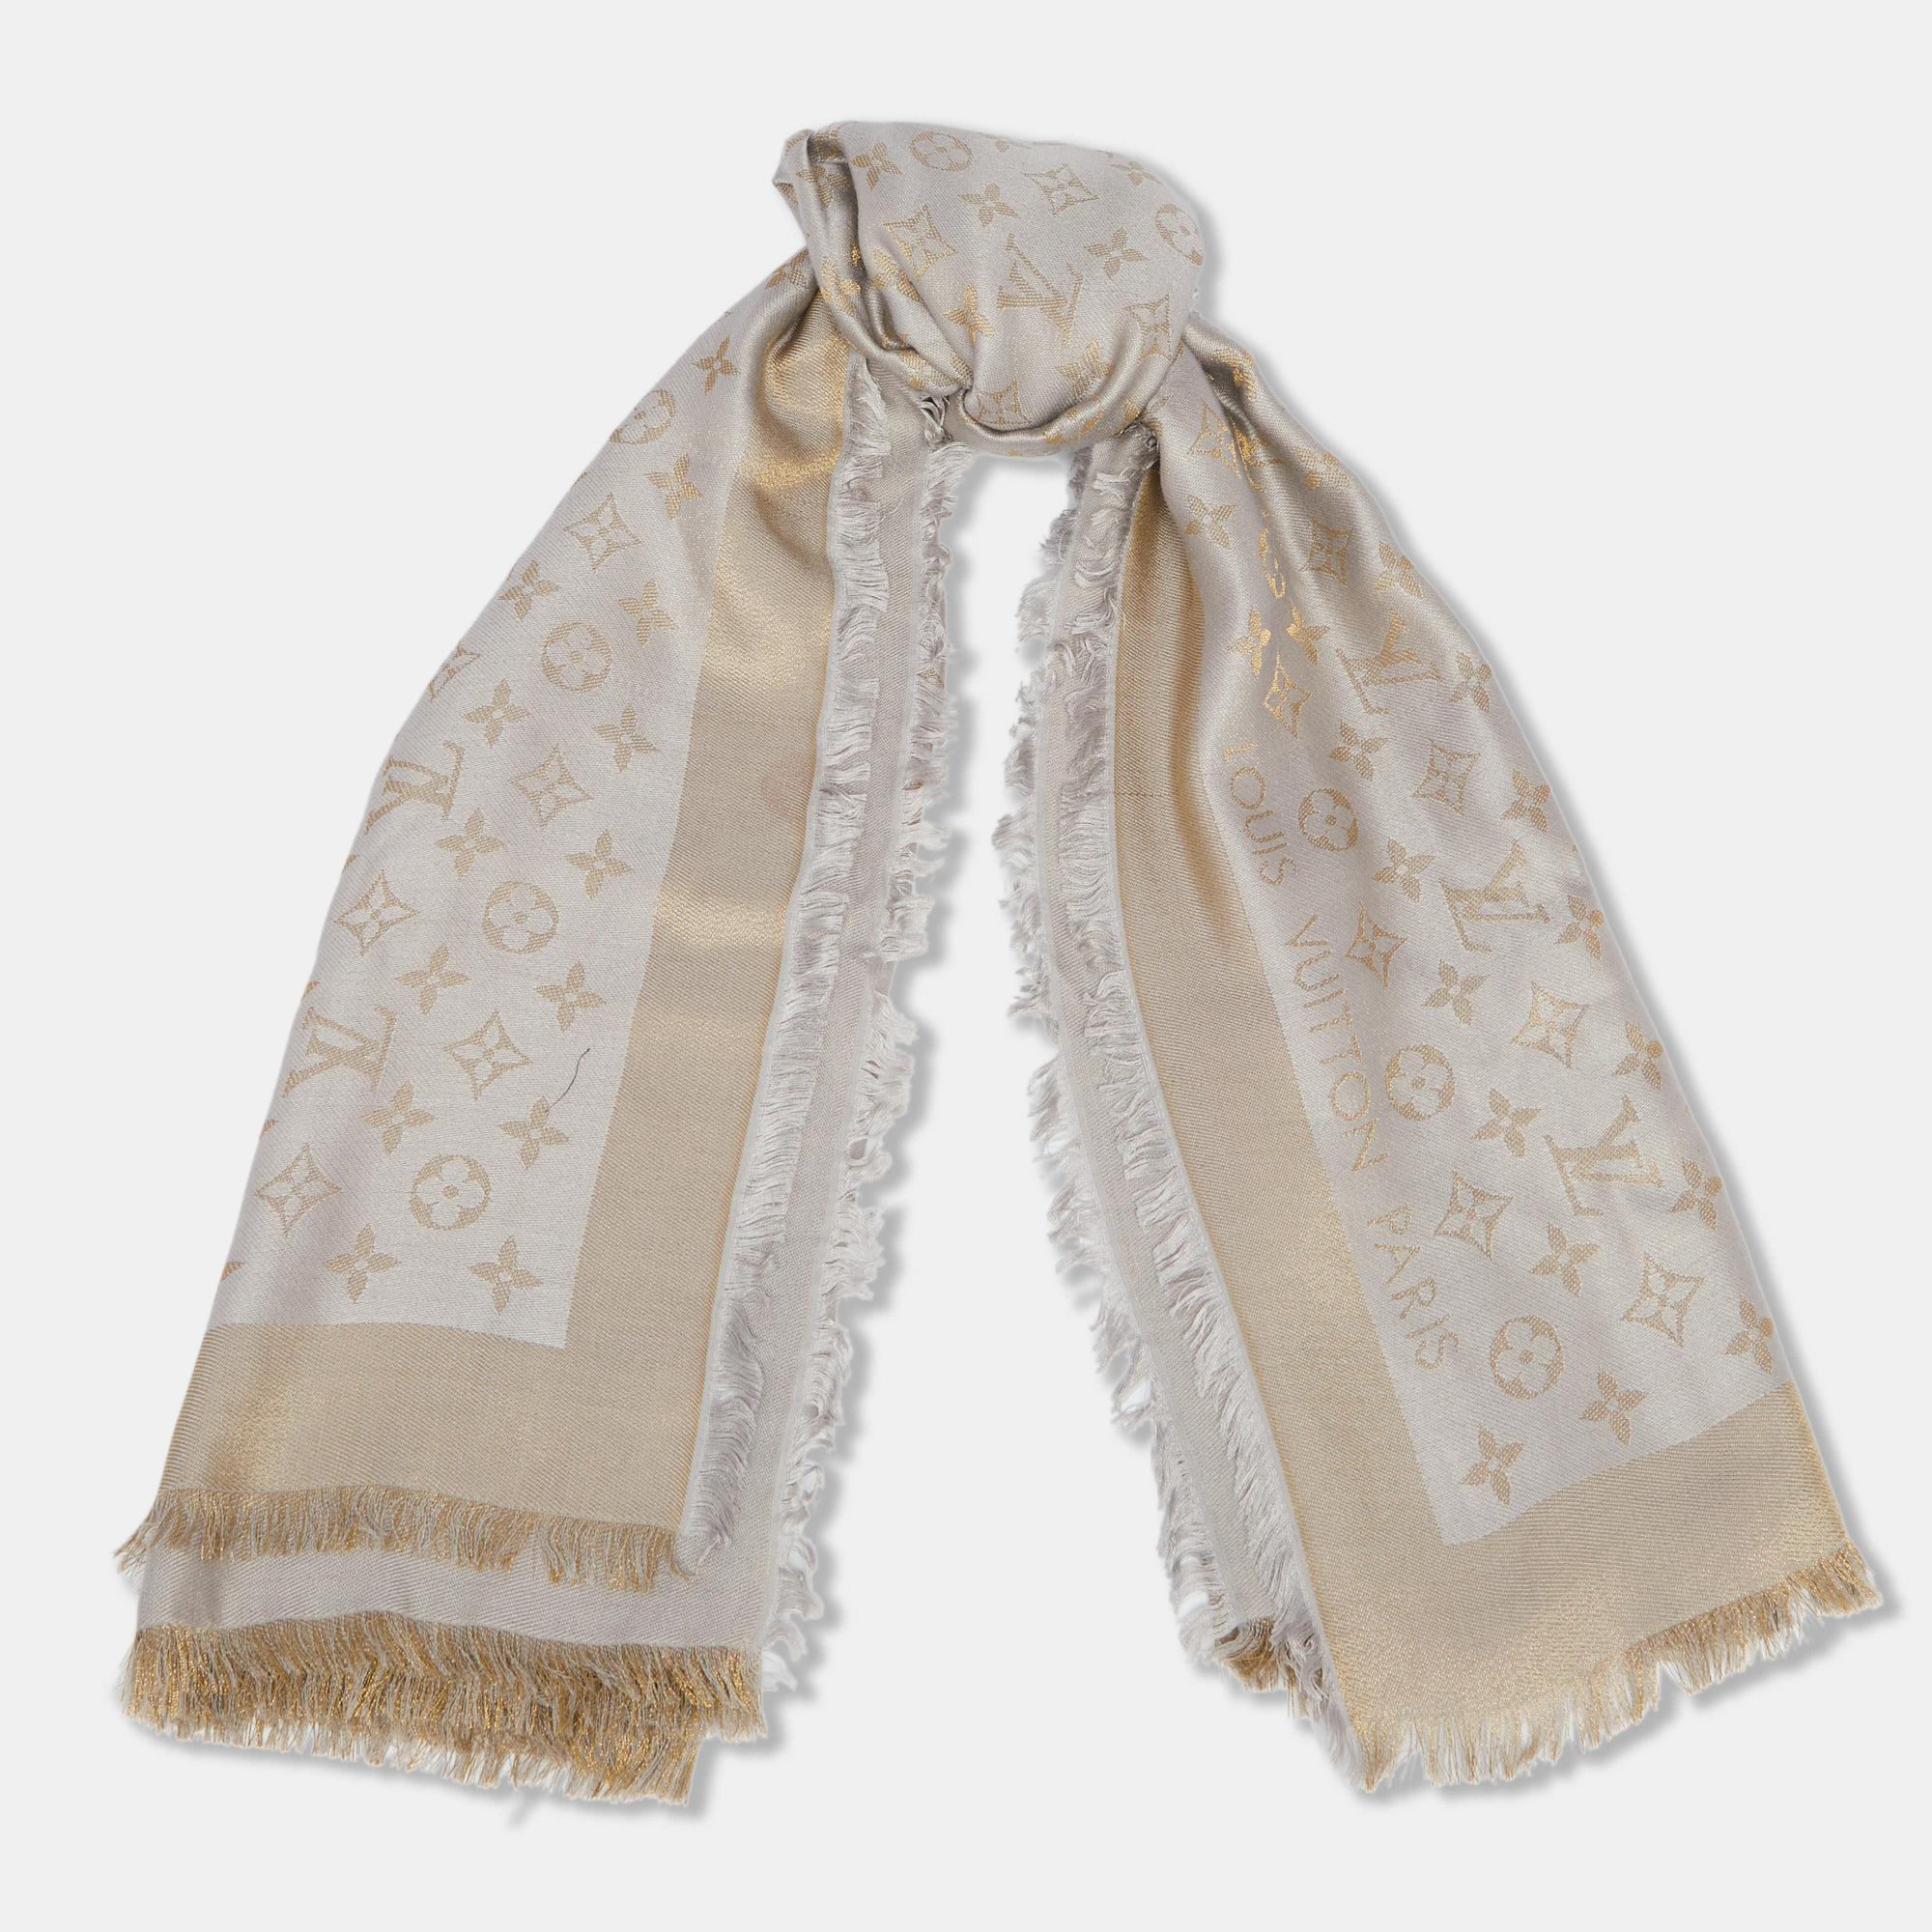 For days when you want your accessory to essay your style, this Louis Vuitton shawl is perfect. It carries a gorgeous shade with the signature monogram all over it. This shawl is created from quality fabrics for a luxurious feel and is completed